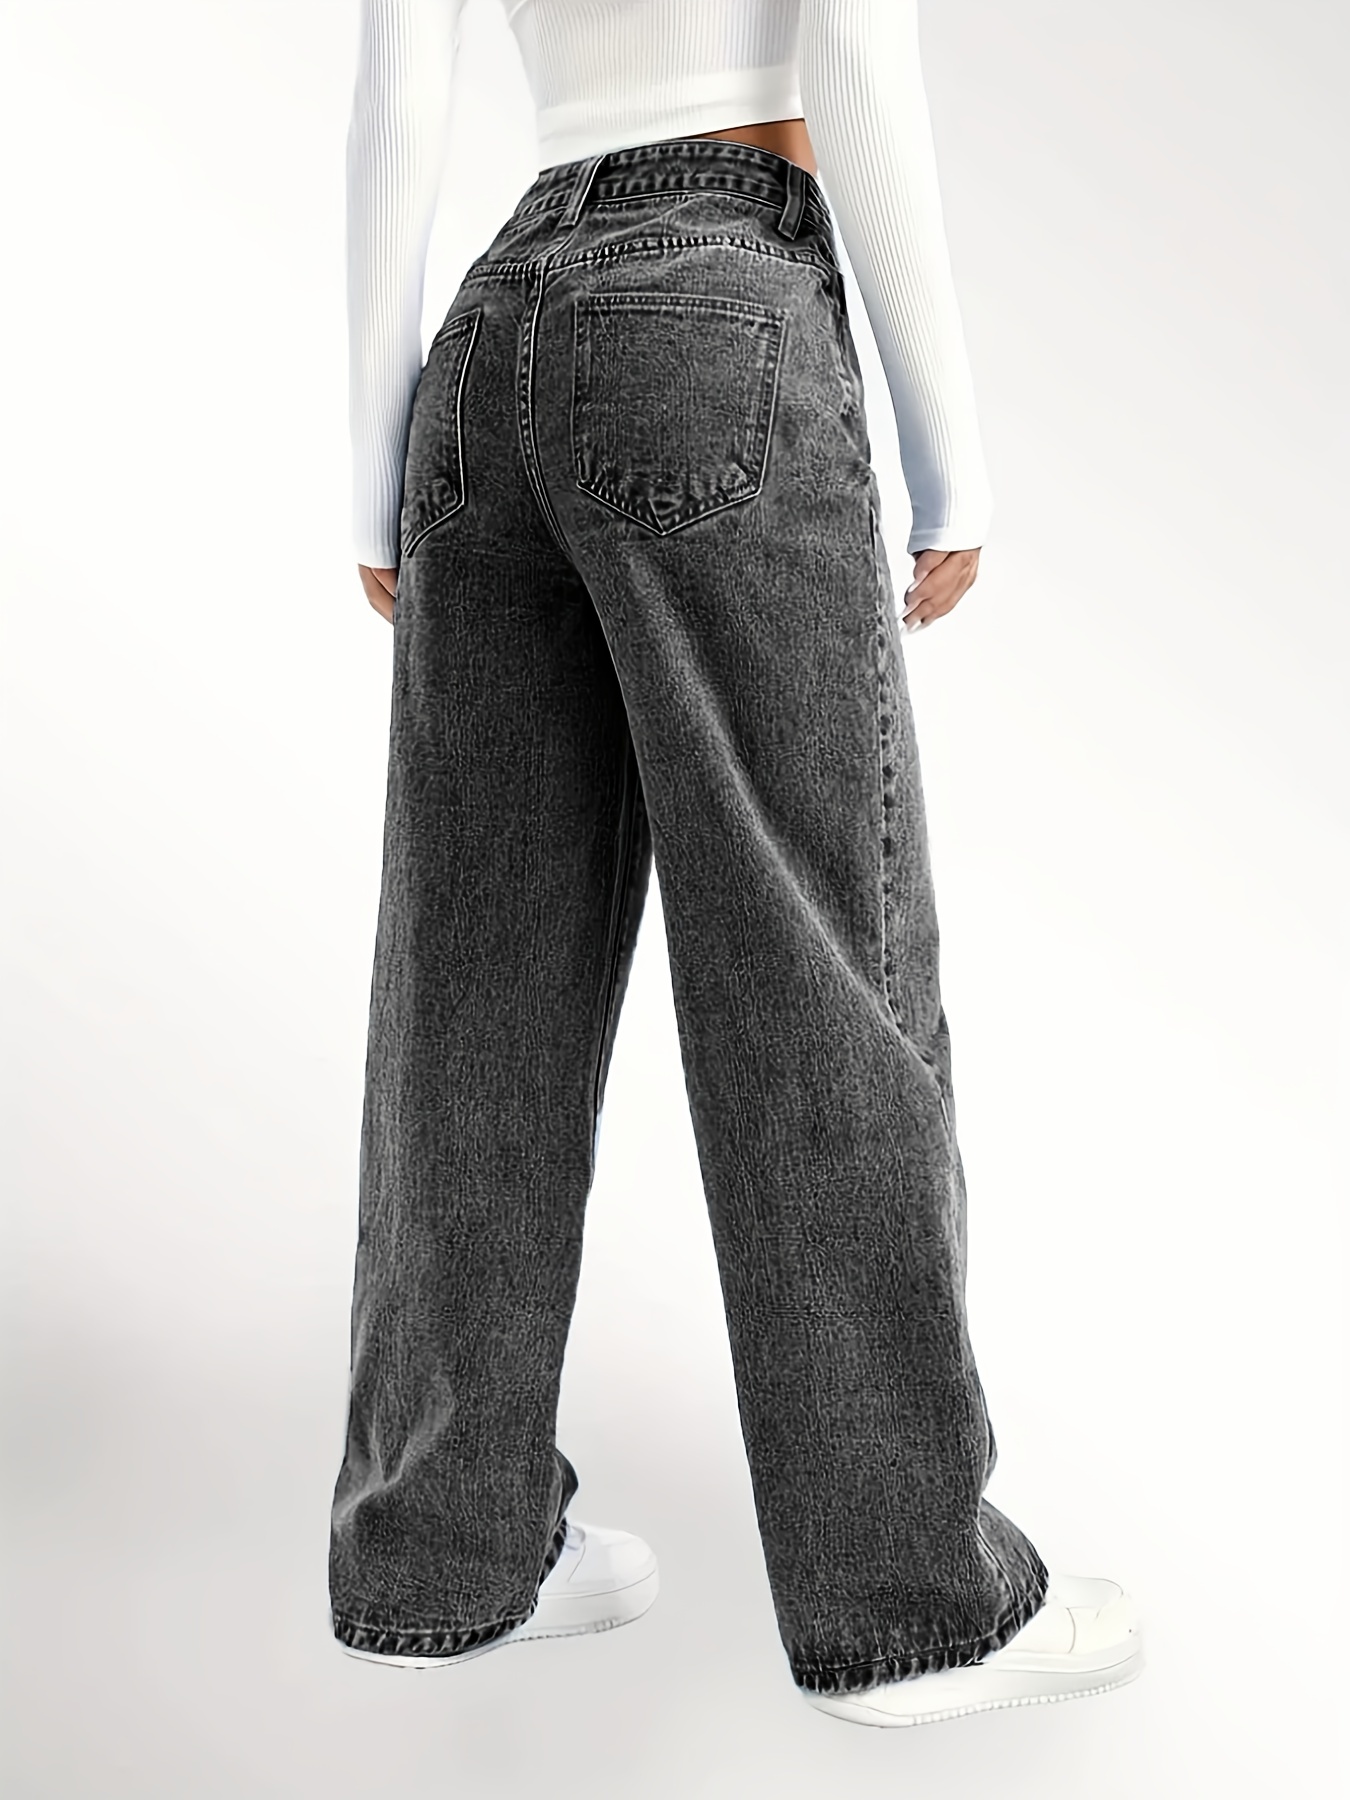 Jeans grises para mujer